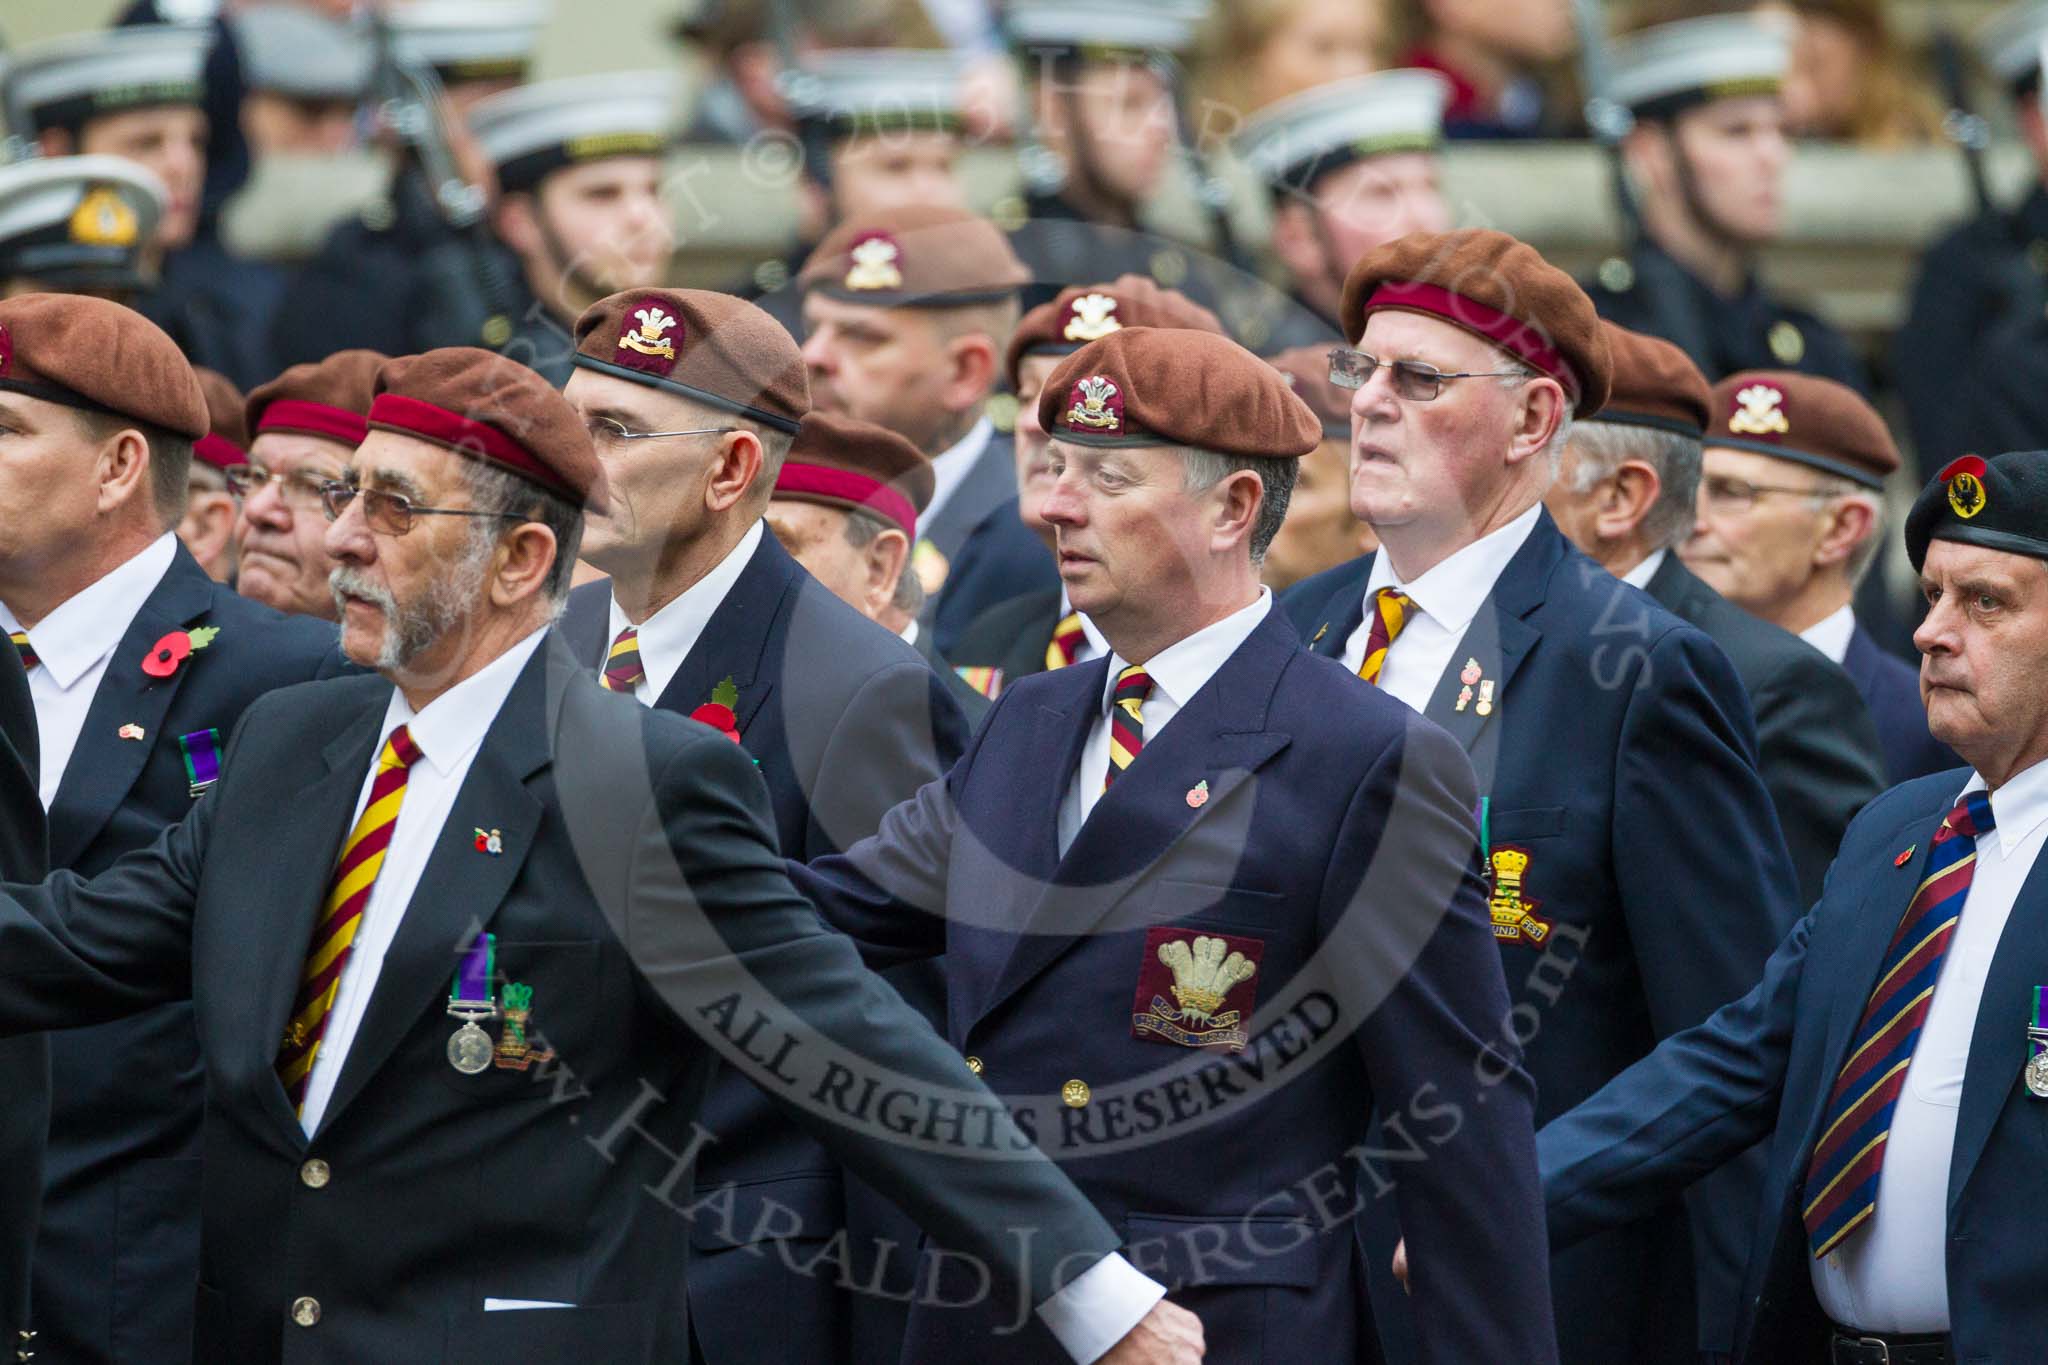 Remembrance Sunday at the Cenotaph 2015: Group B25, Kings Royal Hussars Regimental Association.
Cenotaph, Whitehall, London SW1,
London,
Greater London,
United Kingdom,
on 08 November 2015 at 11:41, image #200